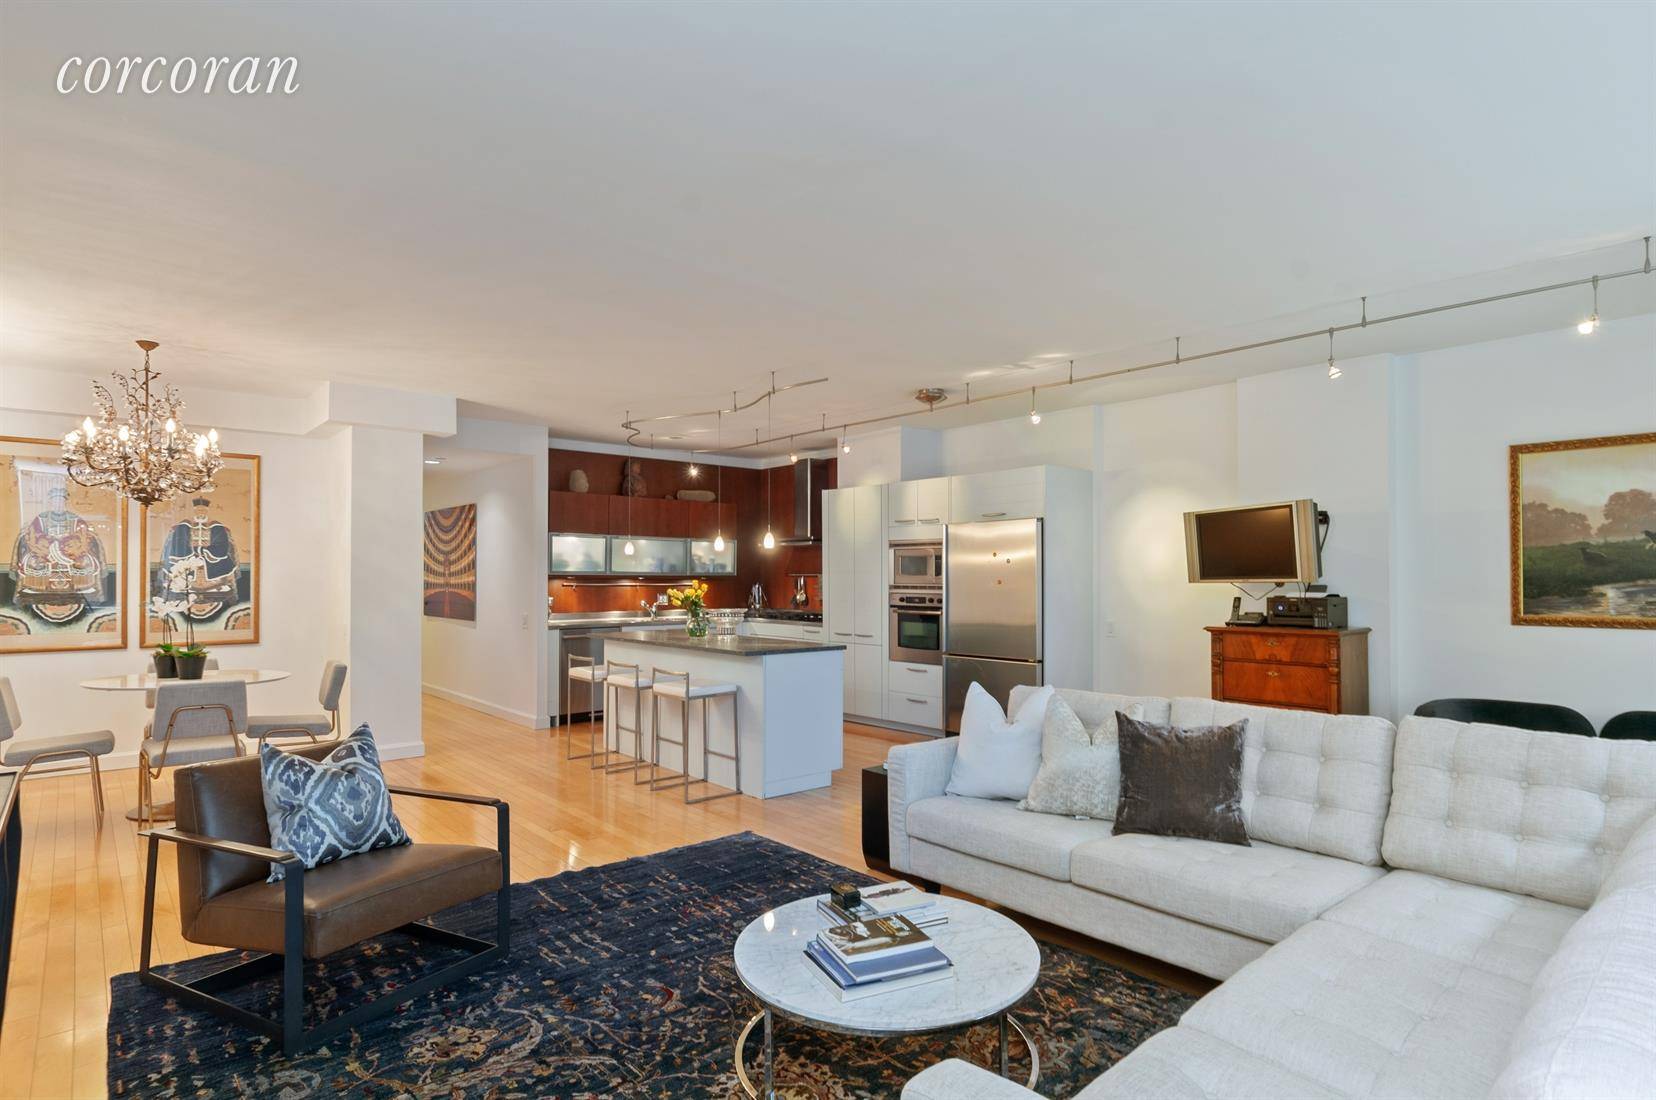 Fall in love with this very spacious, light filled condominium located in the prime Chelsea neighborhood at 151 West 17th Street.